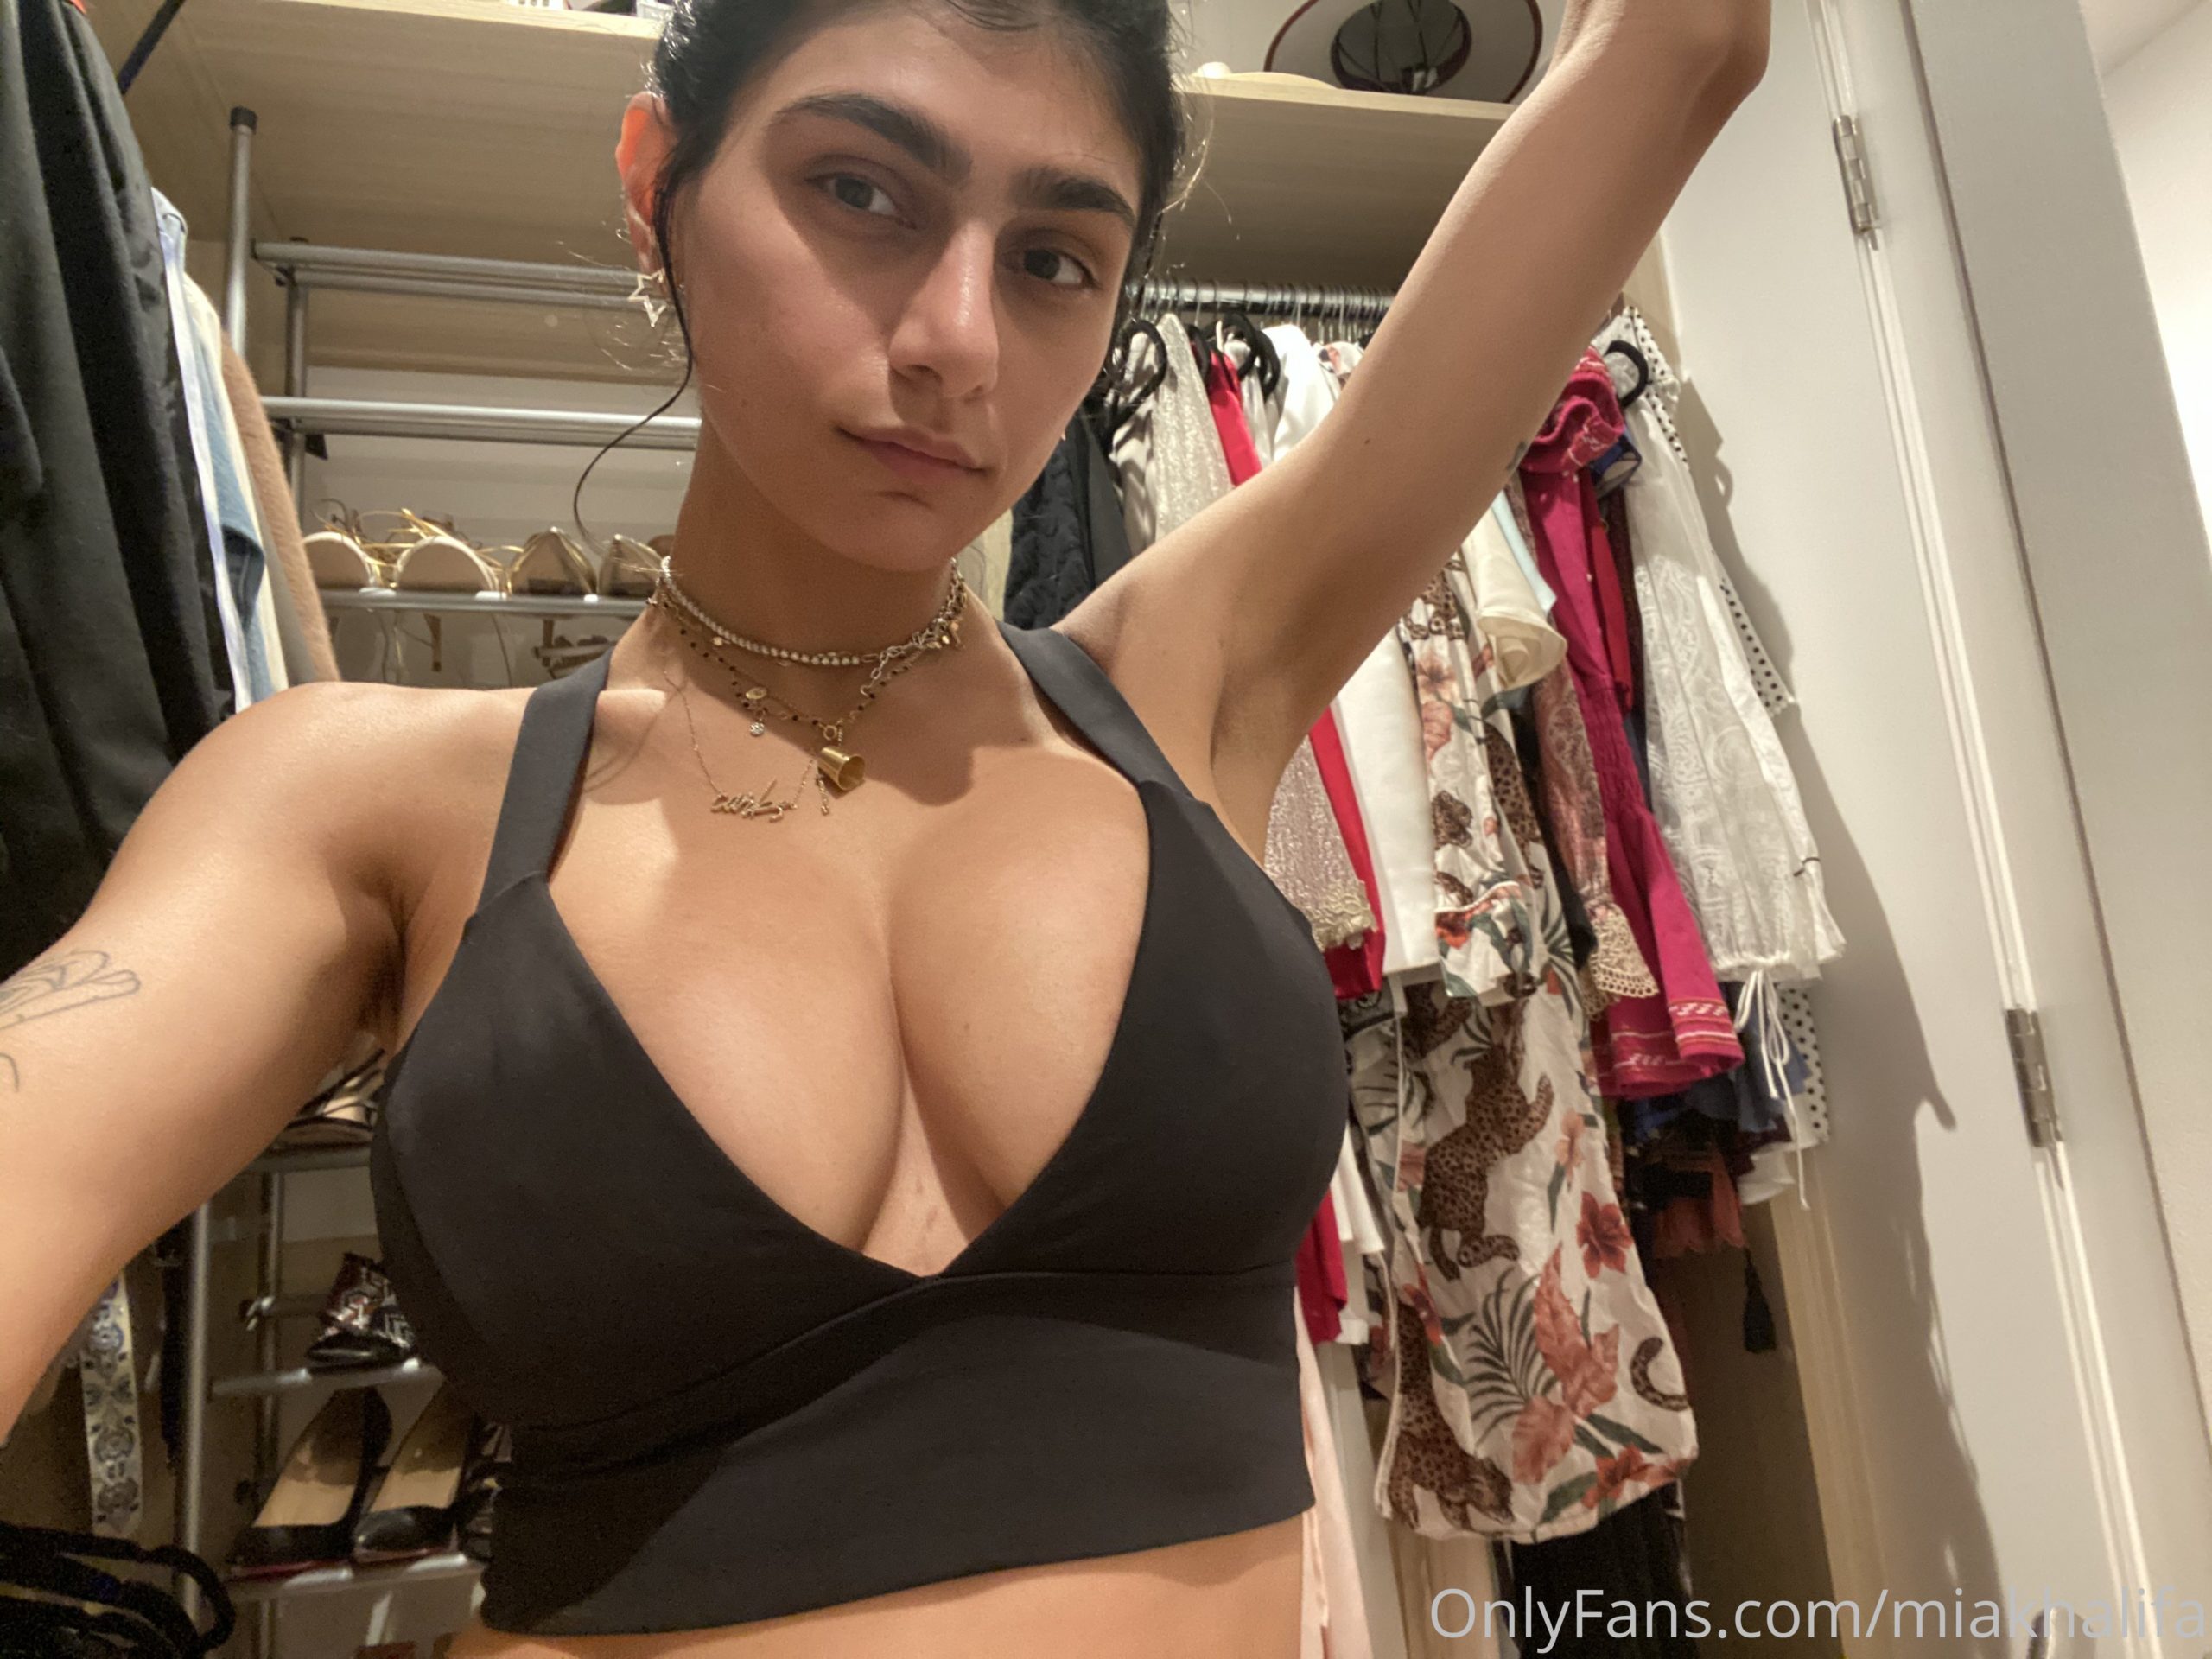 Today Mia Khalifa Onlyfans Nudes Leaked